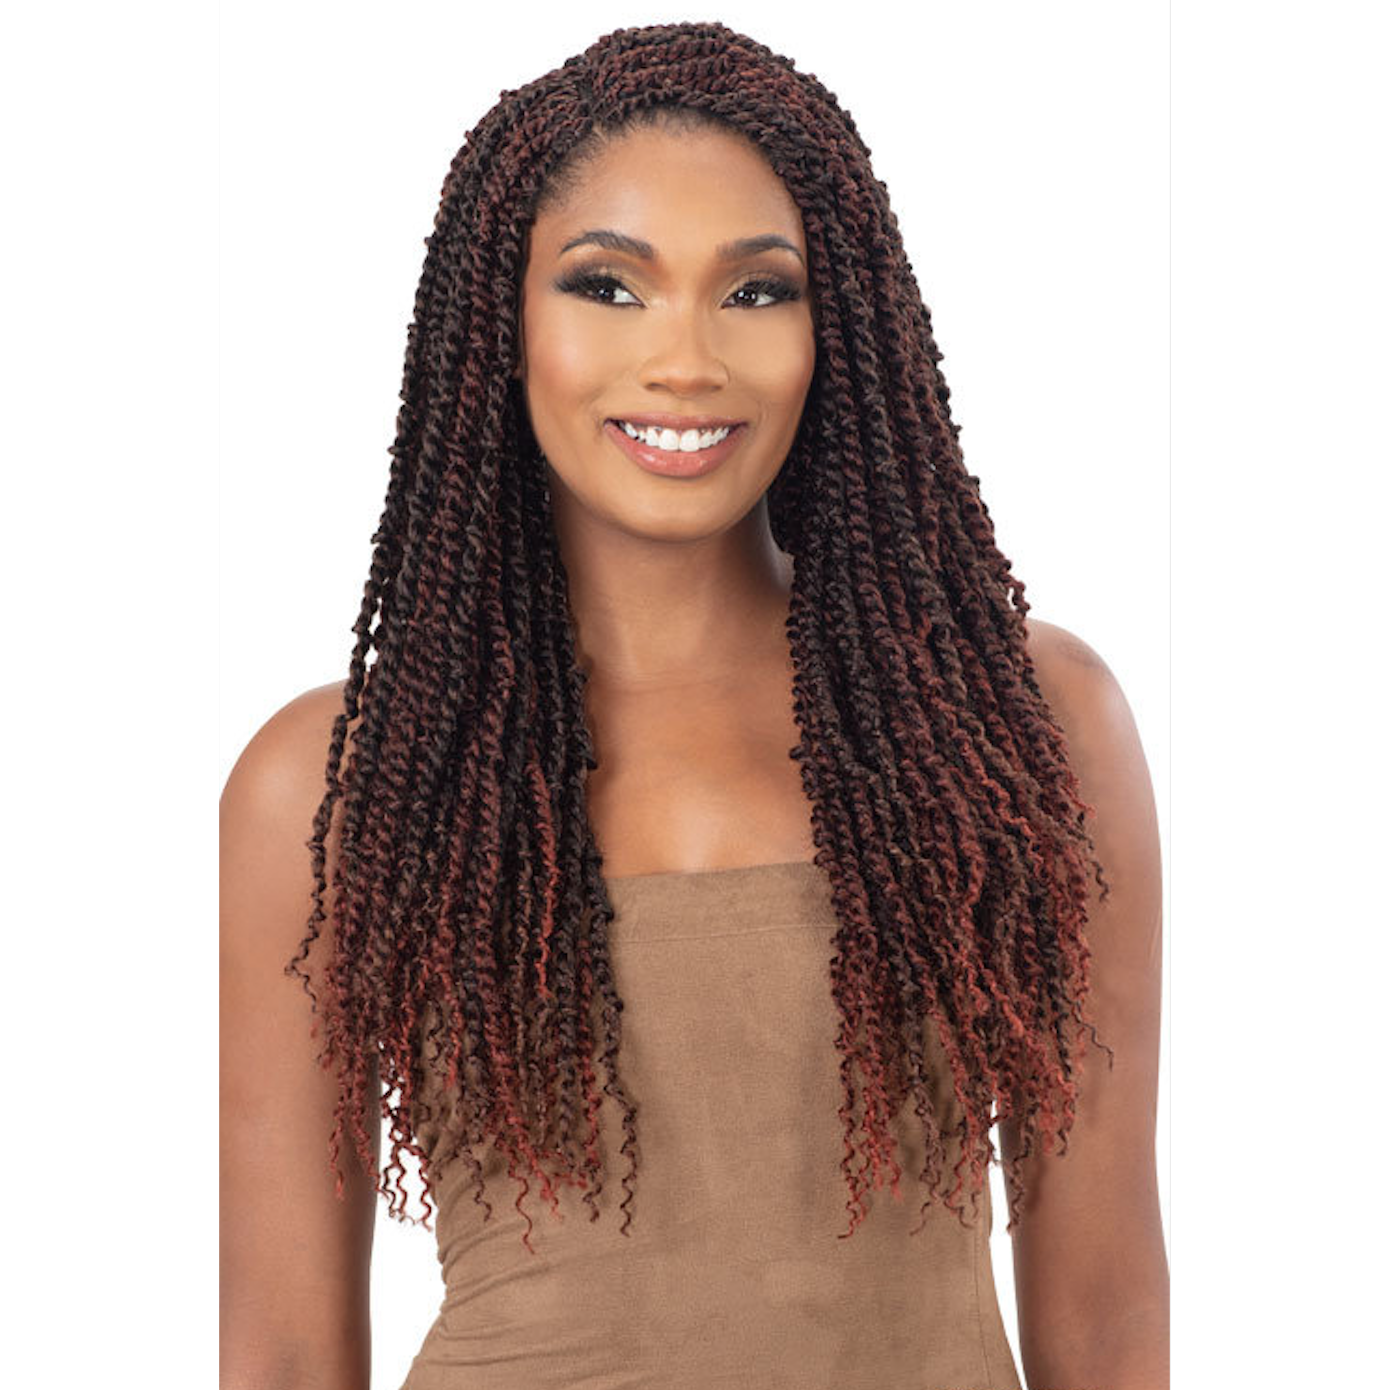 Mayde Beauty Braid 2X Passion Twist 18" - VIP Extensions